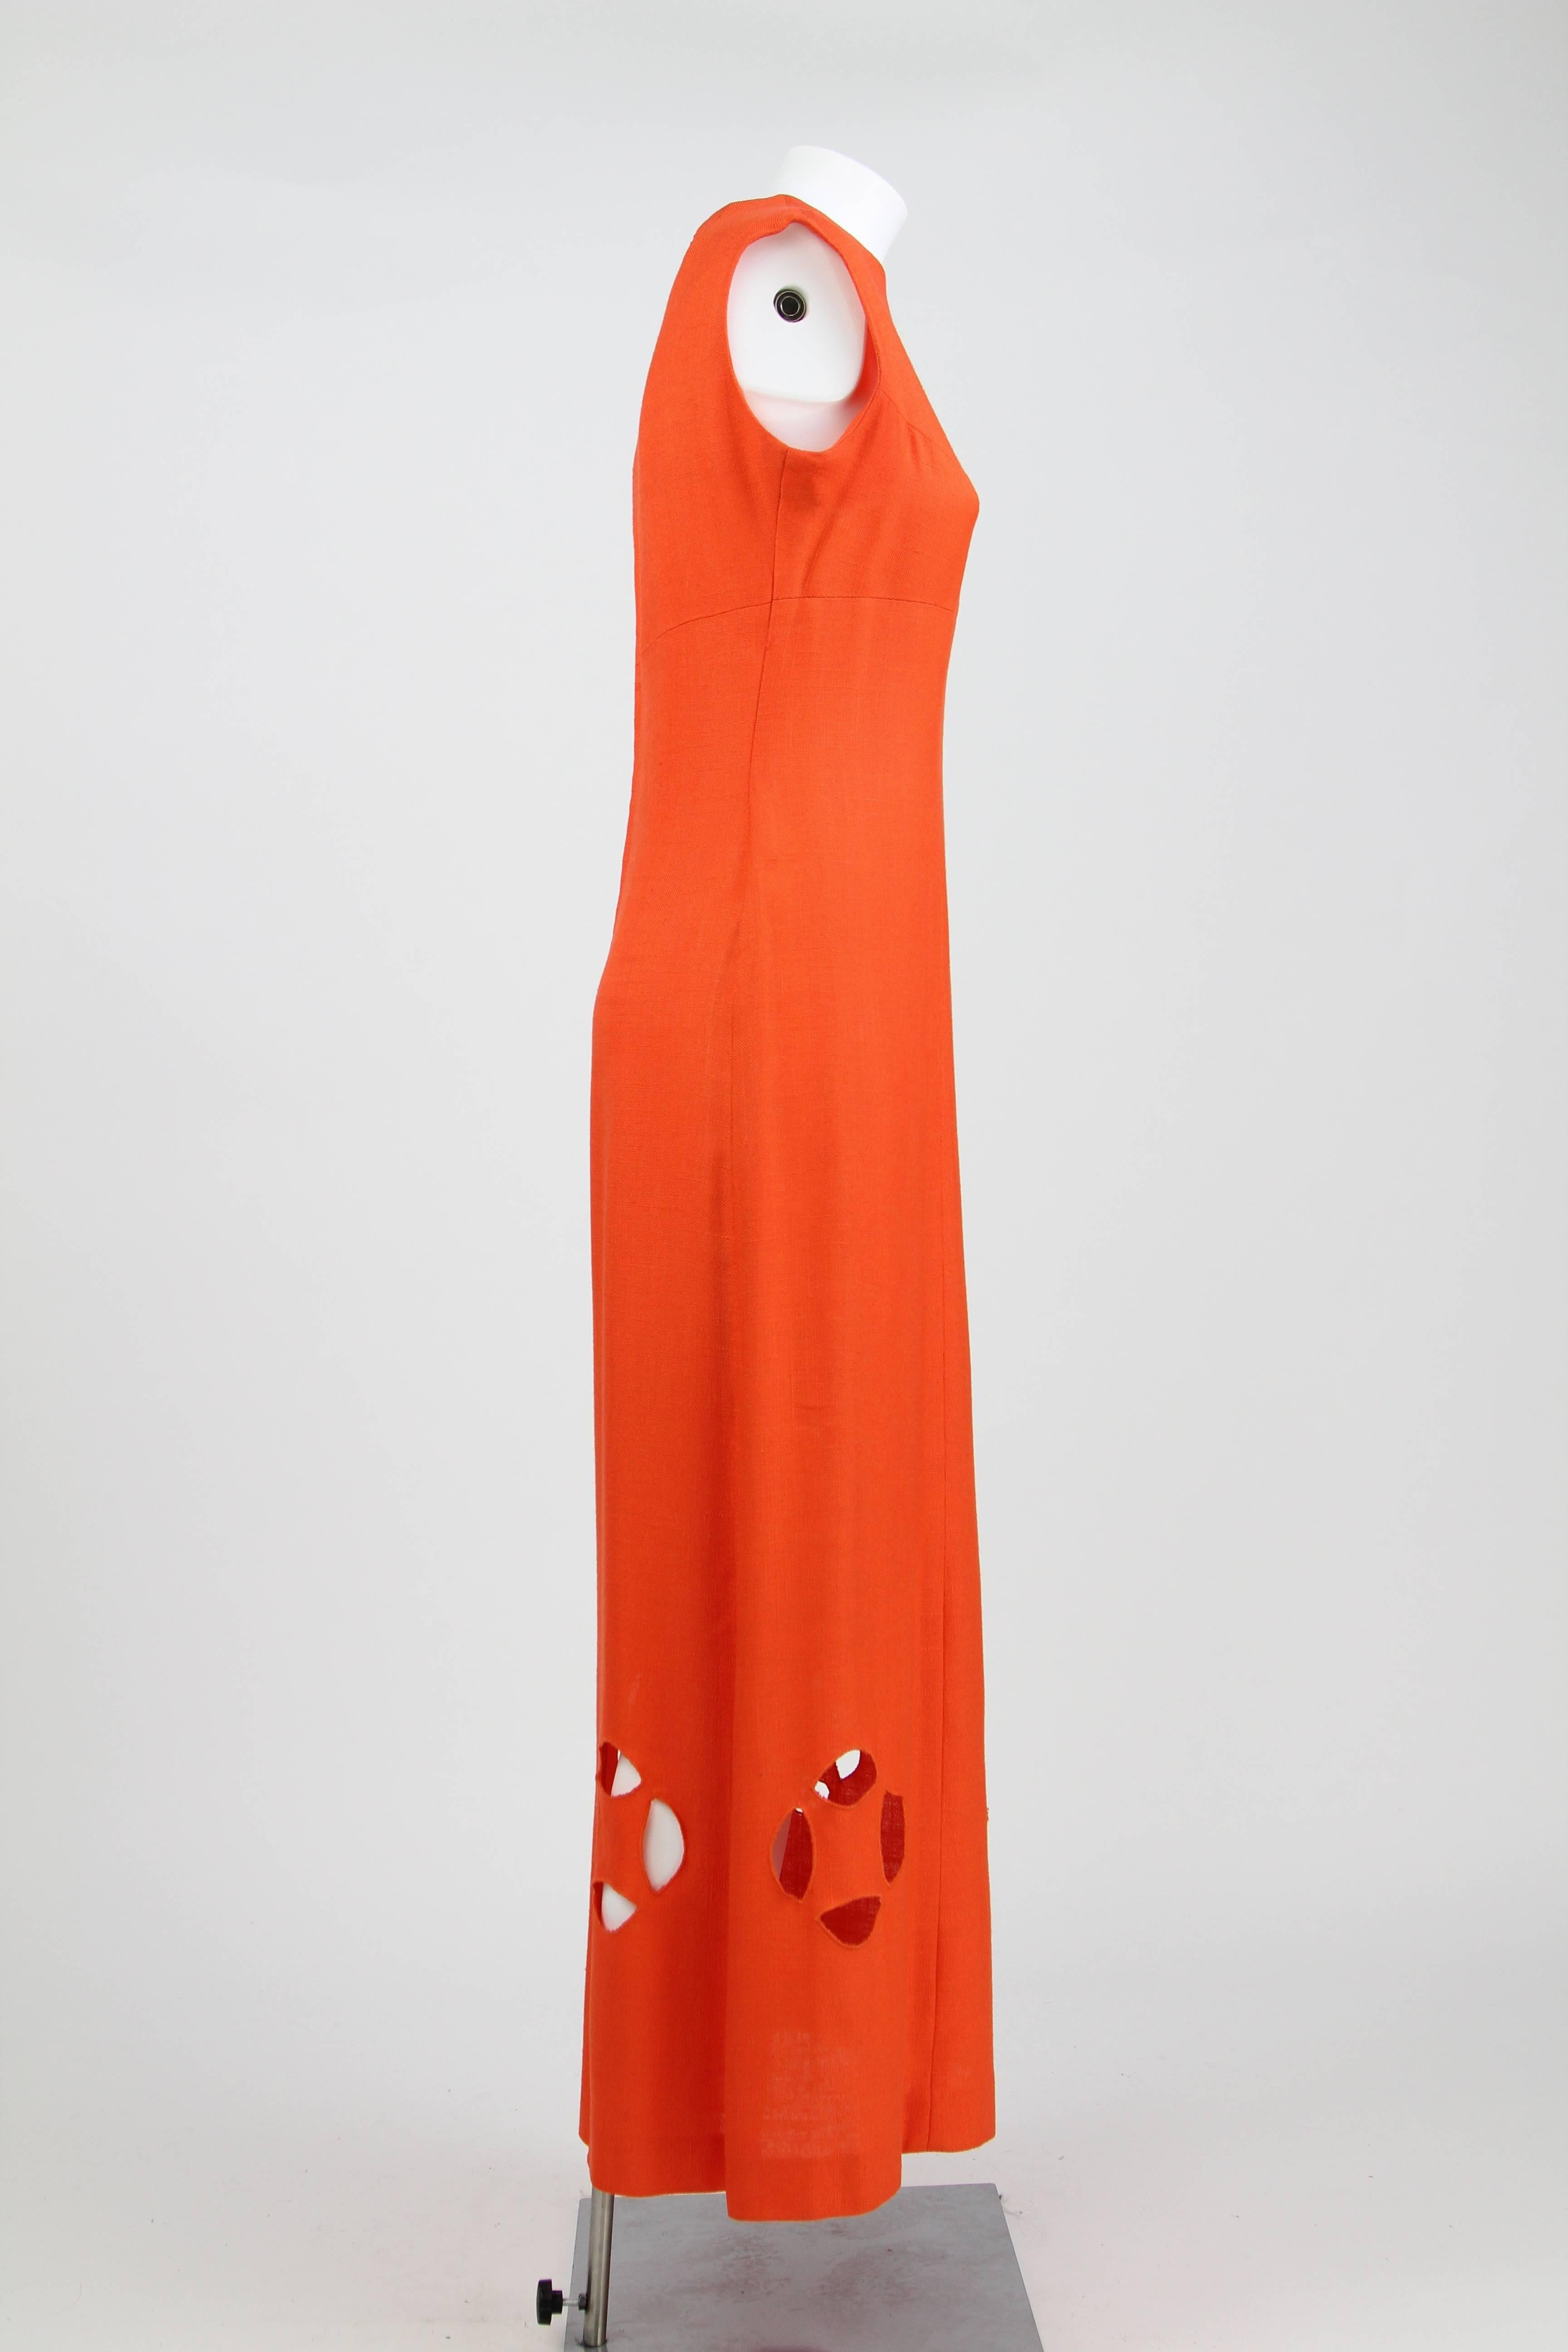 1980s Ein Fink Modell Orange Flax Mid - Length Dress featuring cut-outs, made in Italy.
In excellent conditions.
Size EU 40.